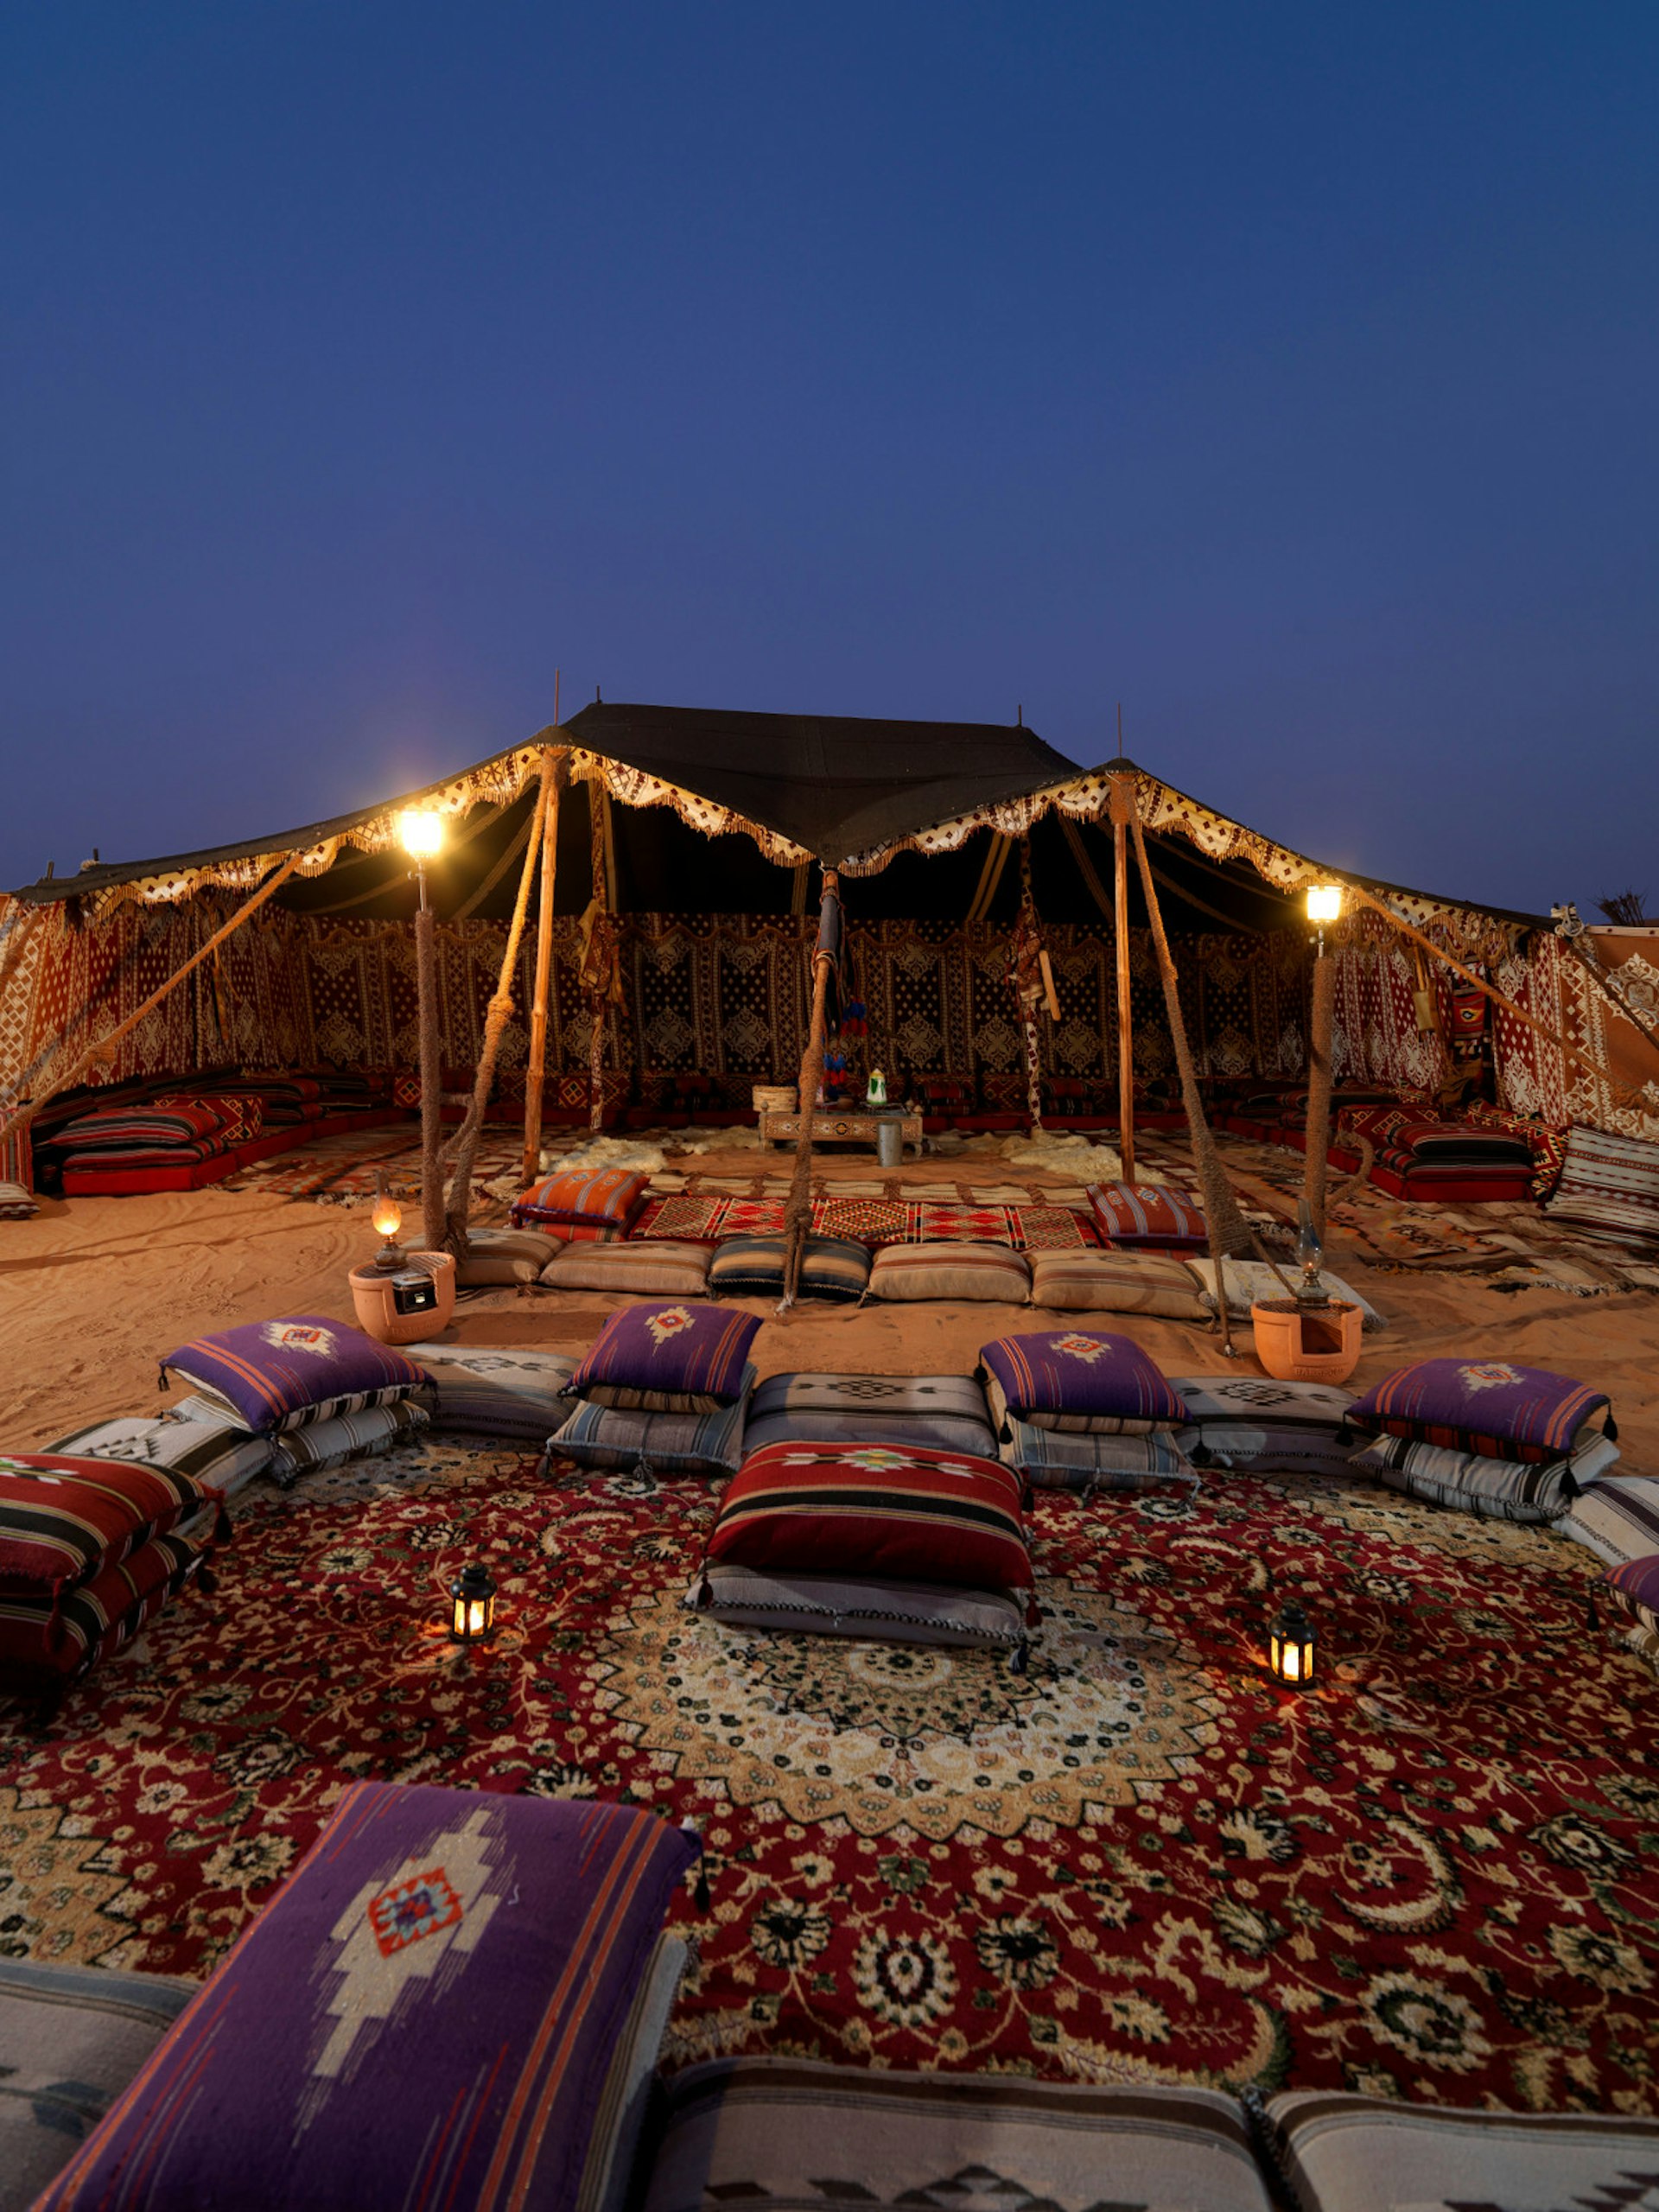 Spin your own Arabian Nights tale at the Bedouin Oasis Desert Camp. Image by Ras al Khaimah Tourism Development Authority